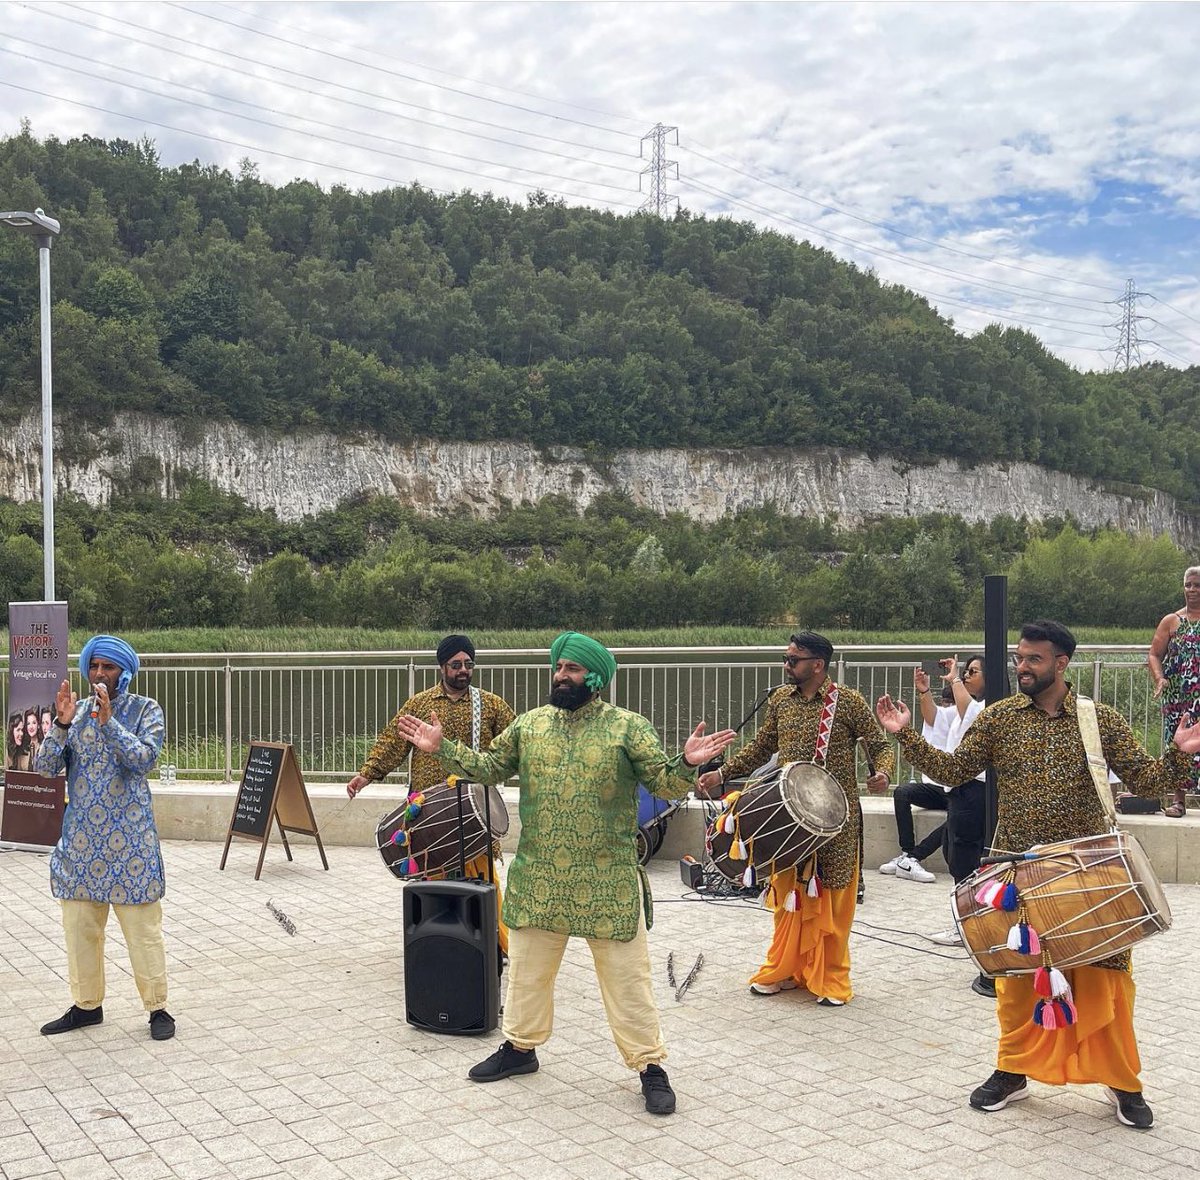 What a great atmosphere to bring everyone together here at #EbbsfleetFusion! 🥁 Thanks to all our performers who really wowed the crowds here at #PlatinumJubileePark 

@cohesionplus @EbbsfleetLiving @ArtsBlueprint #ebbsfleetgardencity #ebbsfleet #kent #art #festival #music